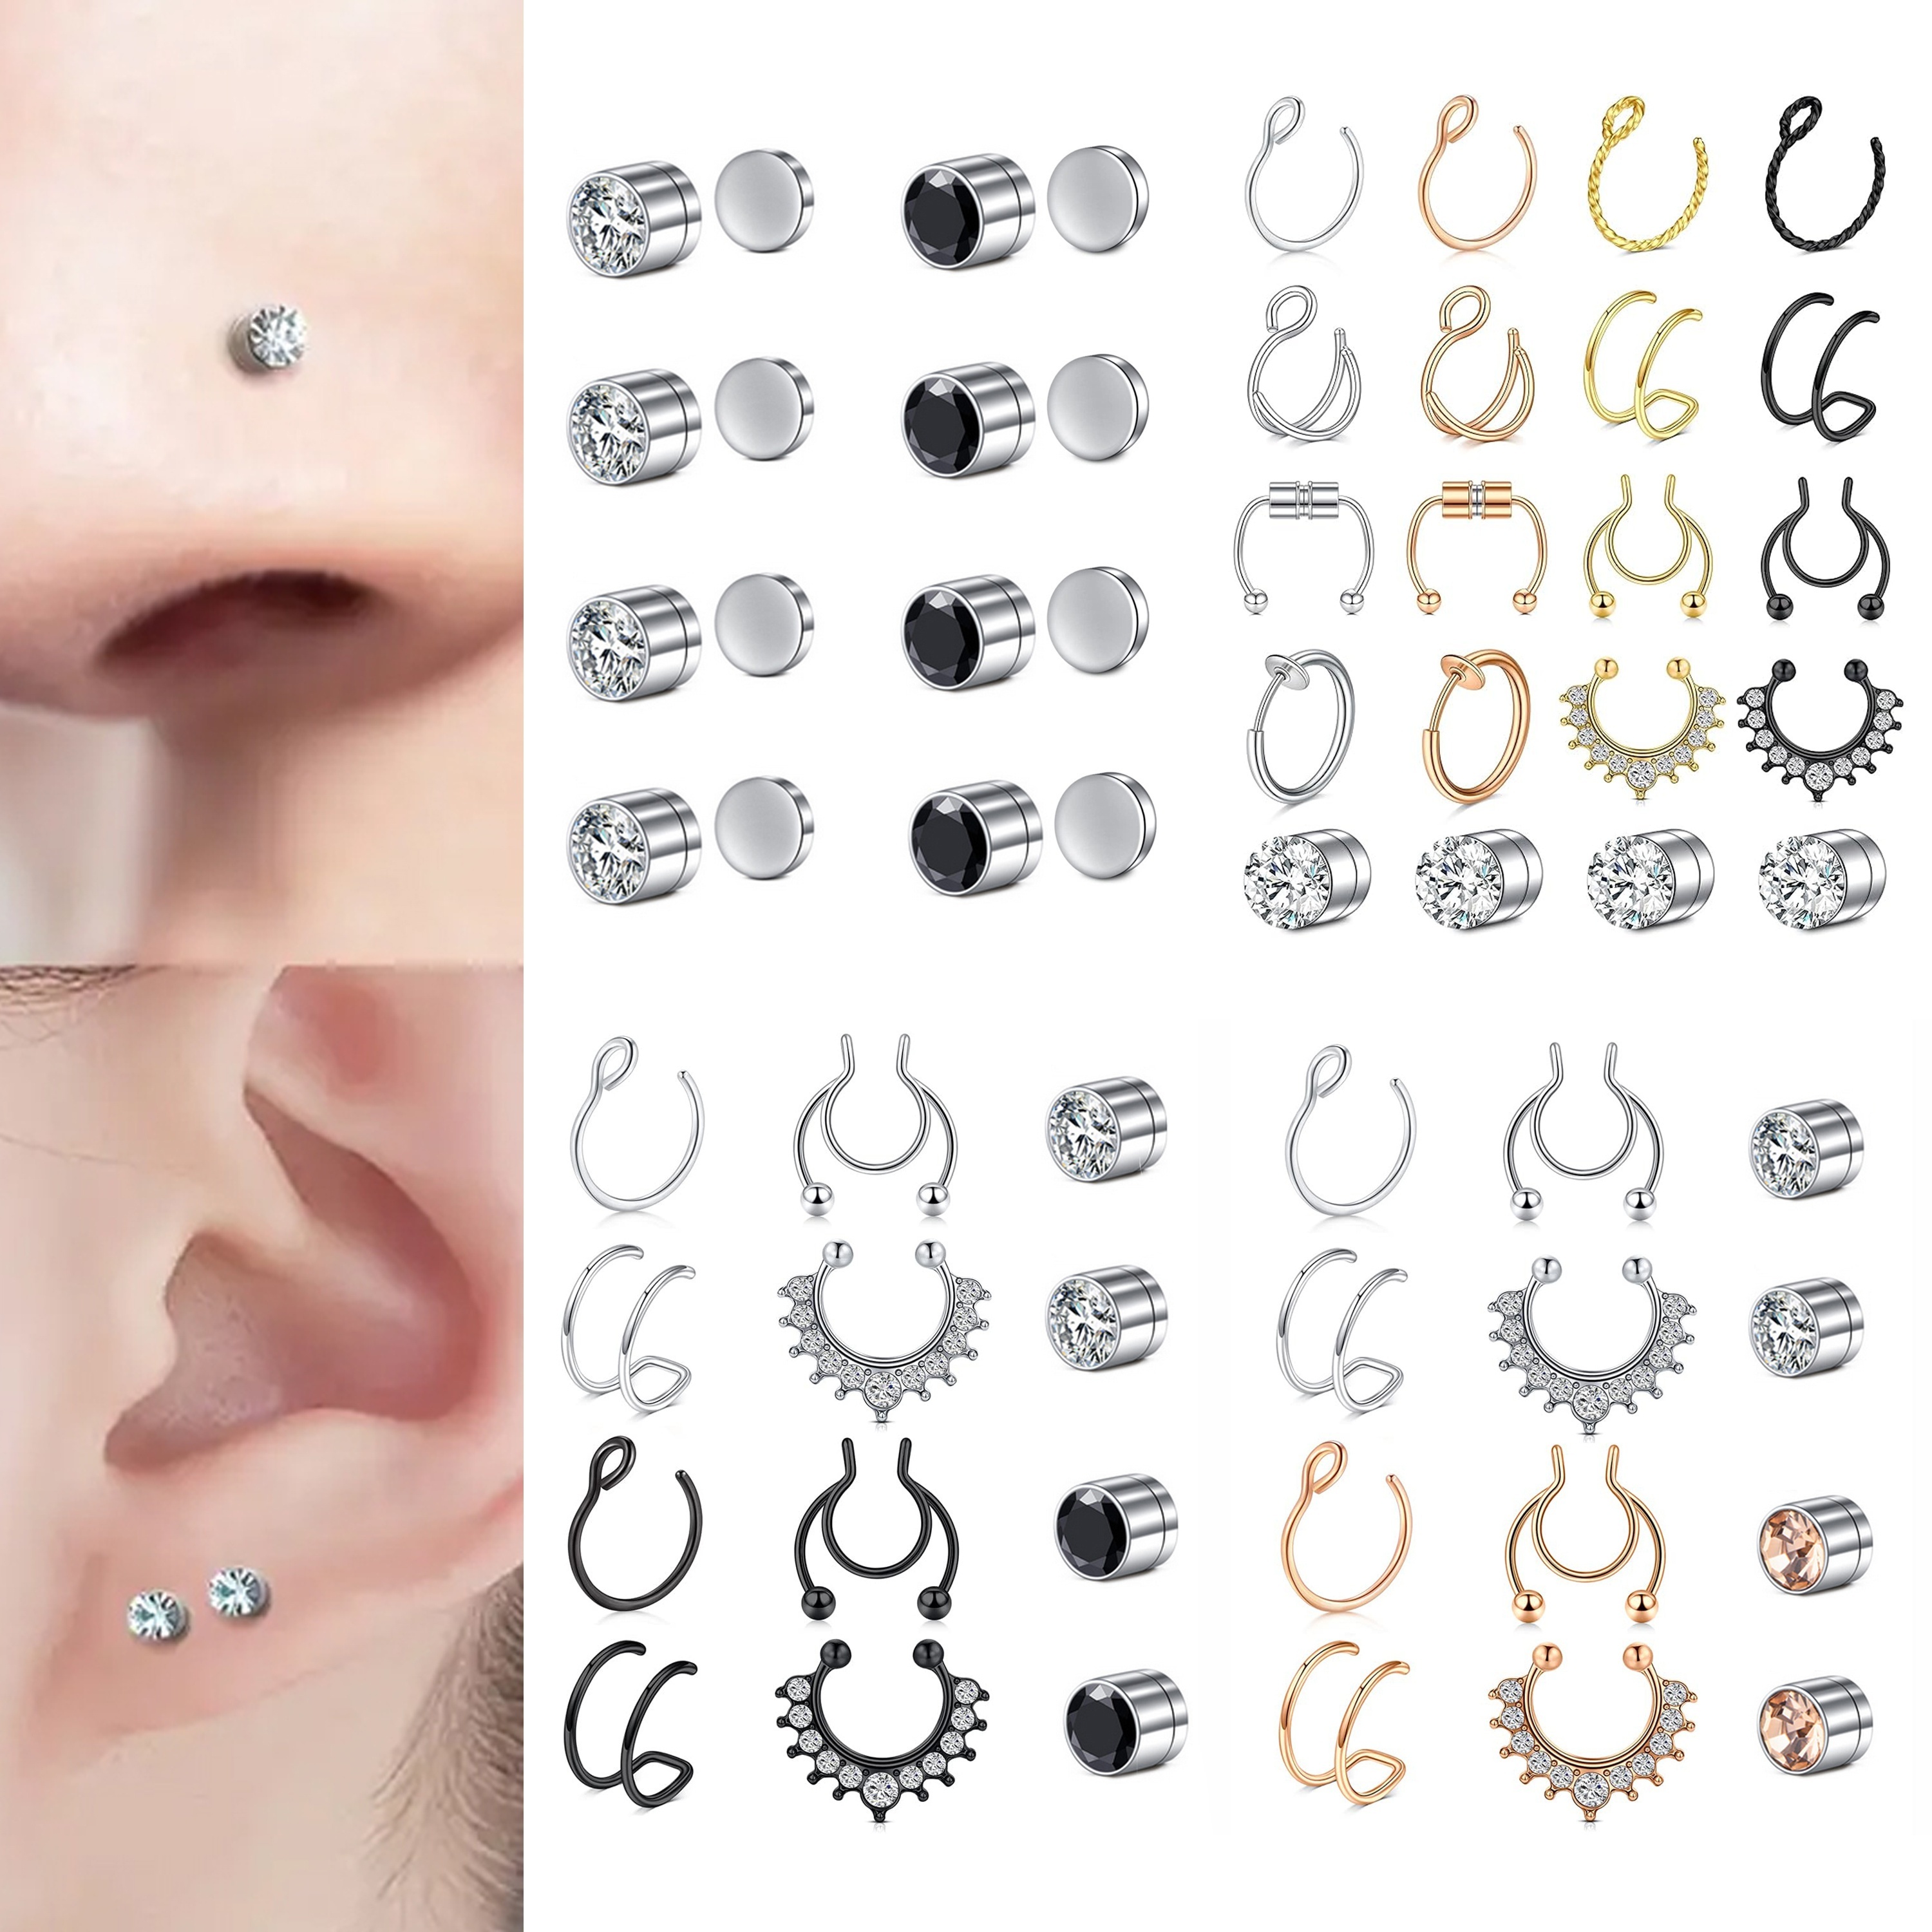 

8-piece Set Of Magnetic Fake Nose Studs, Personalized Punk Style Fake Ear Studs Silver Steel Stainless Steel, Fashionable Women's Nose Non Piercing, Jewelry Set Of Multiple Pieces